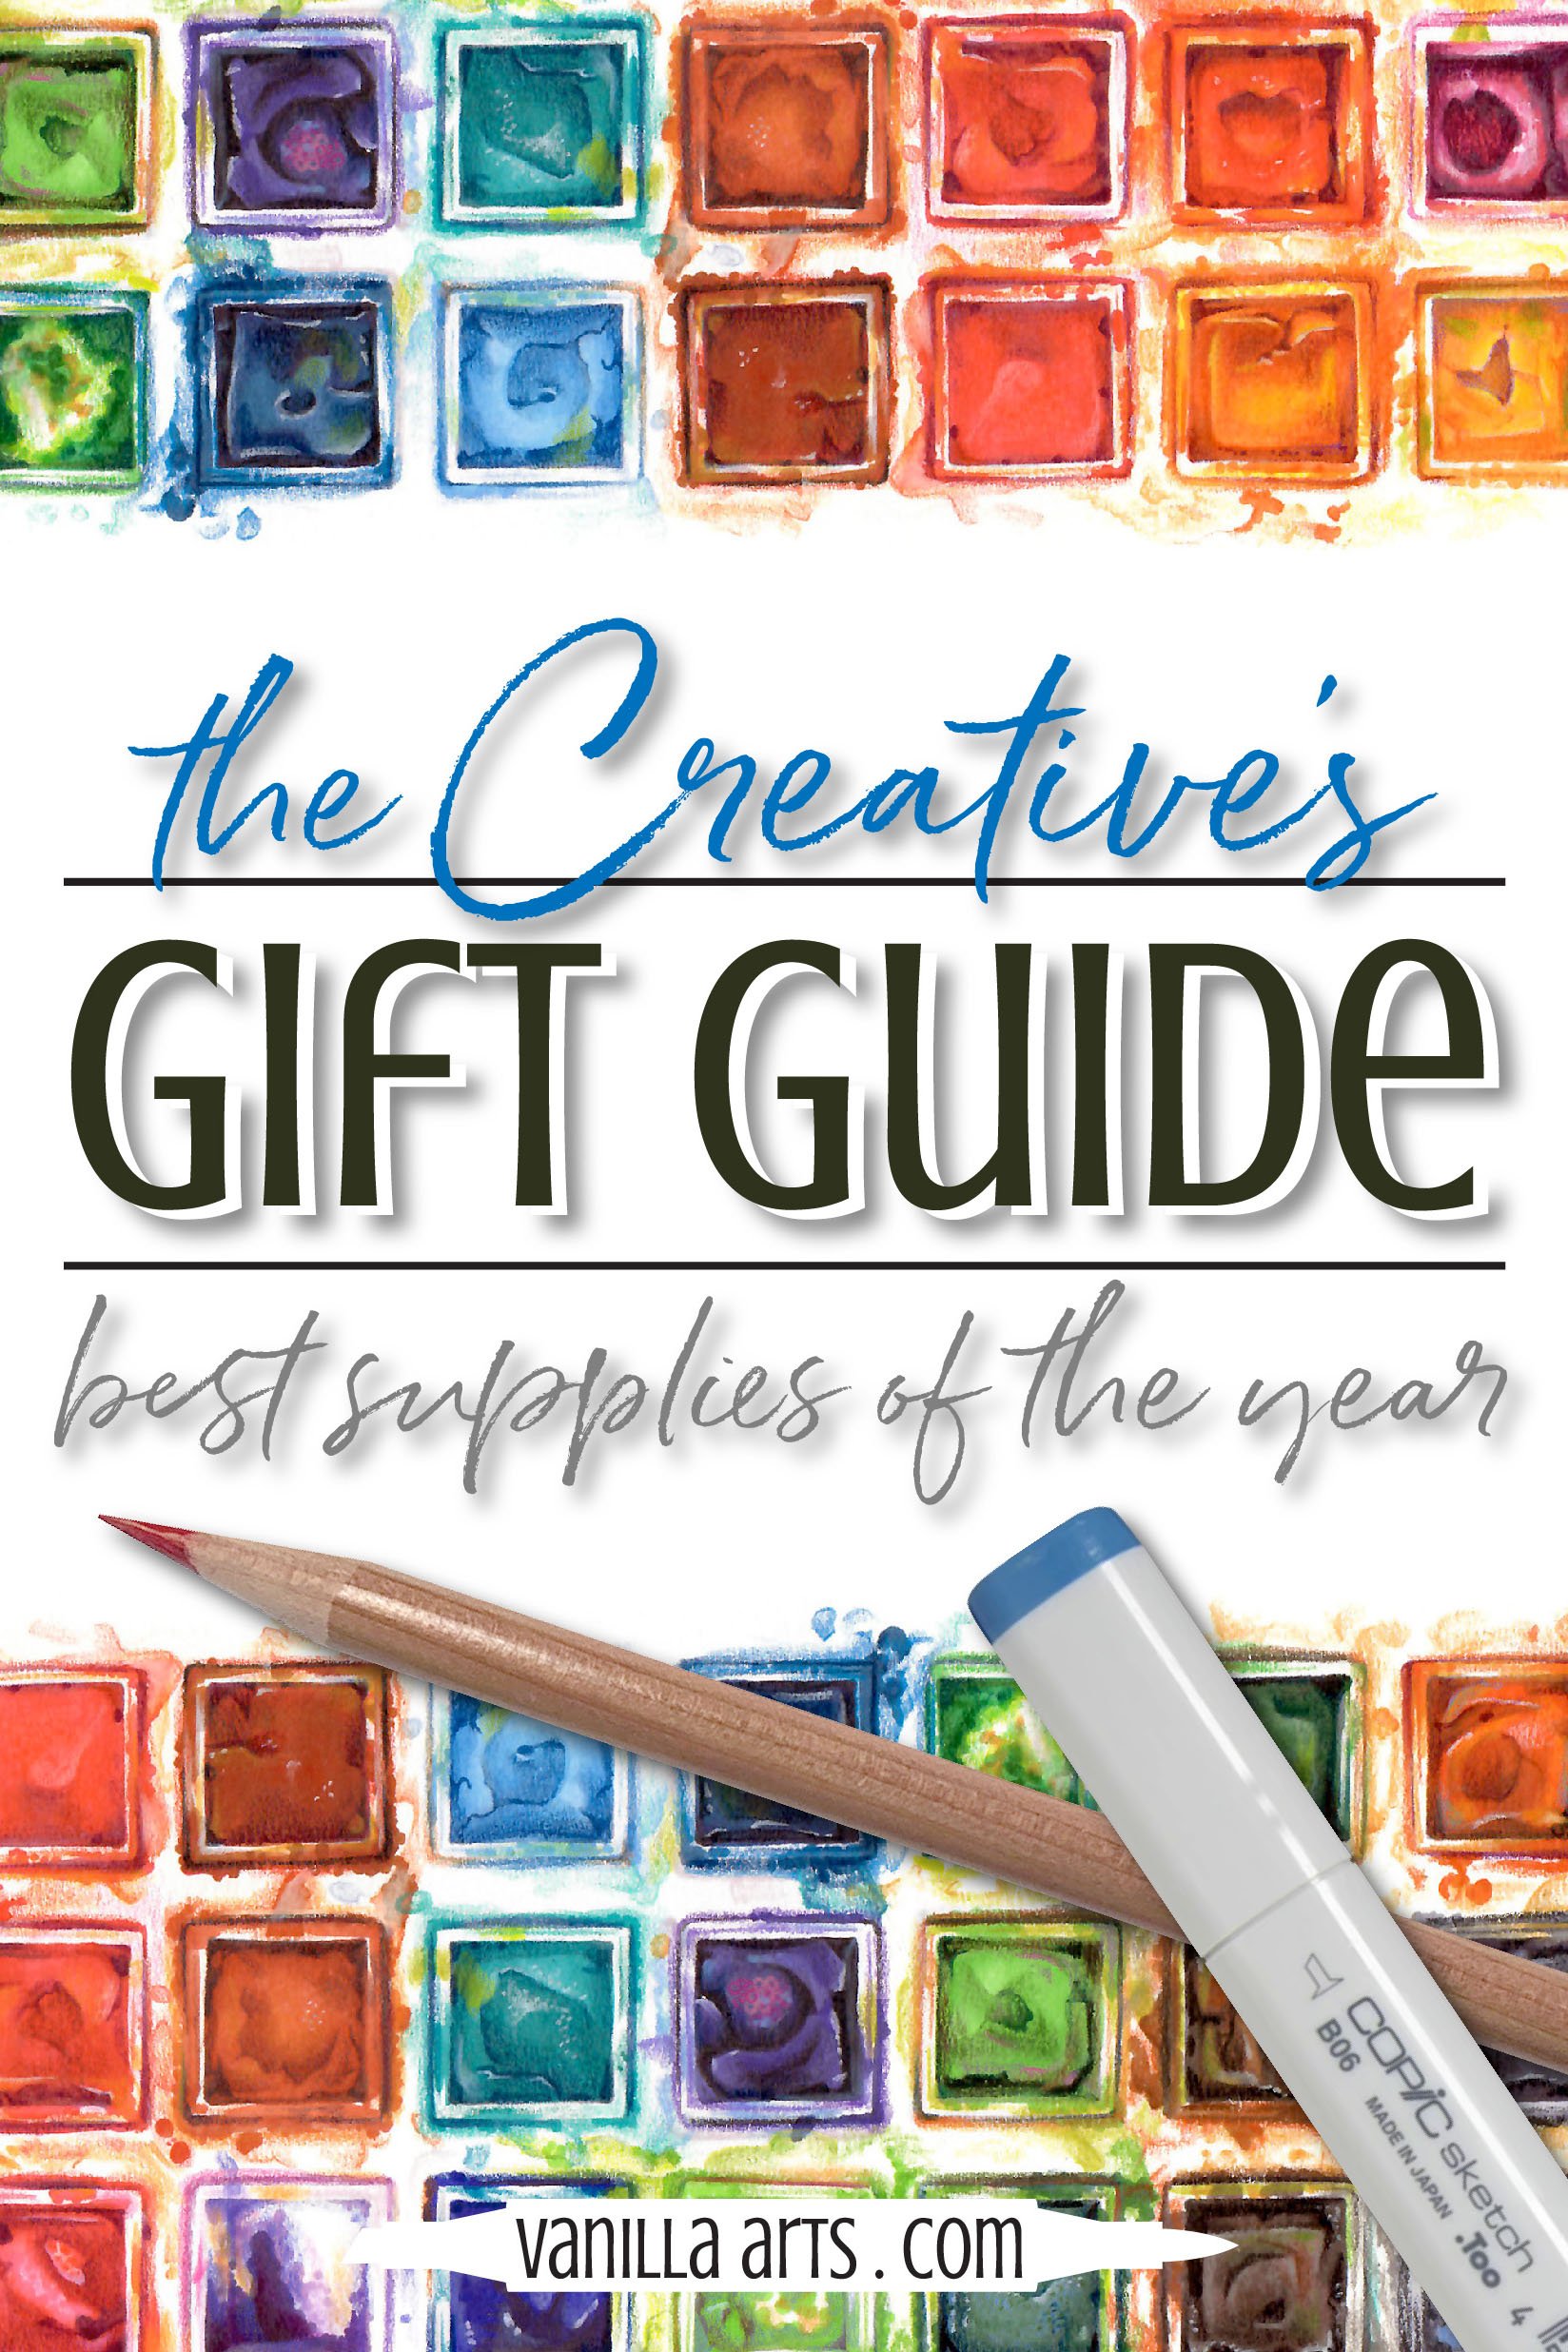 The Creative’s Gift Guide: Best Art Supplies of the Year